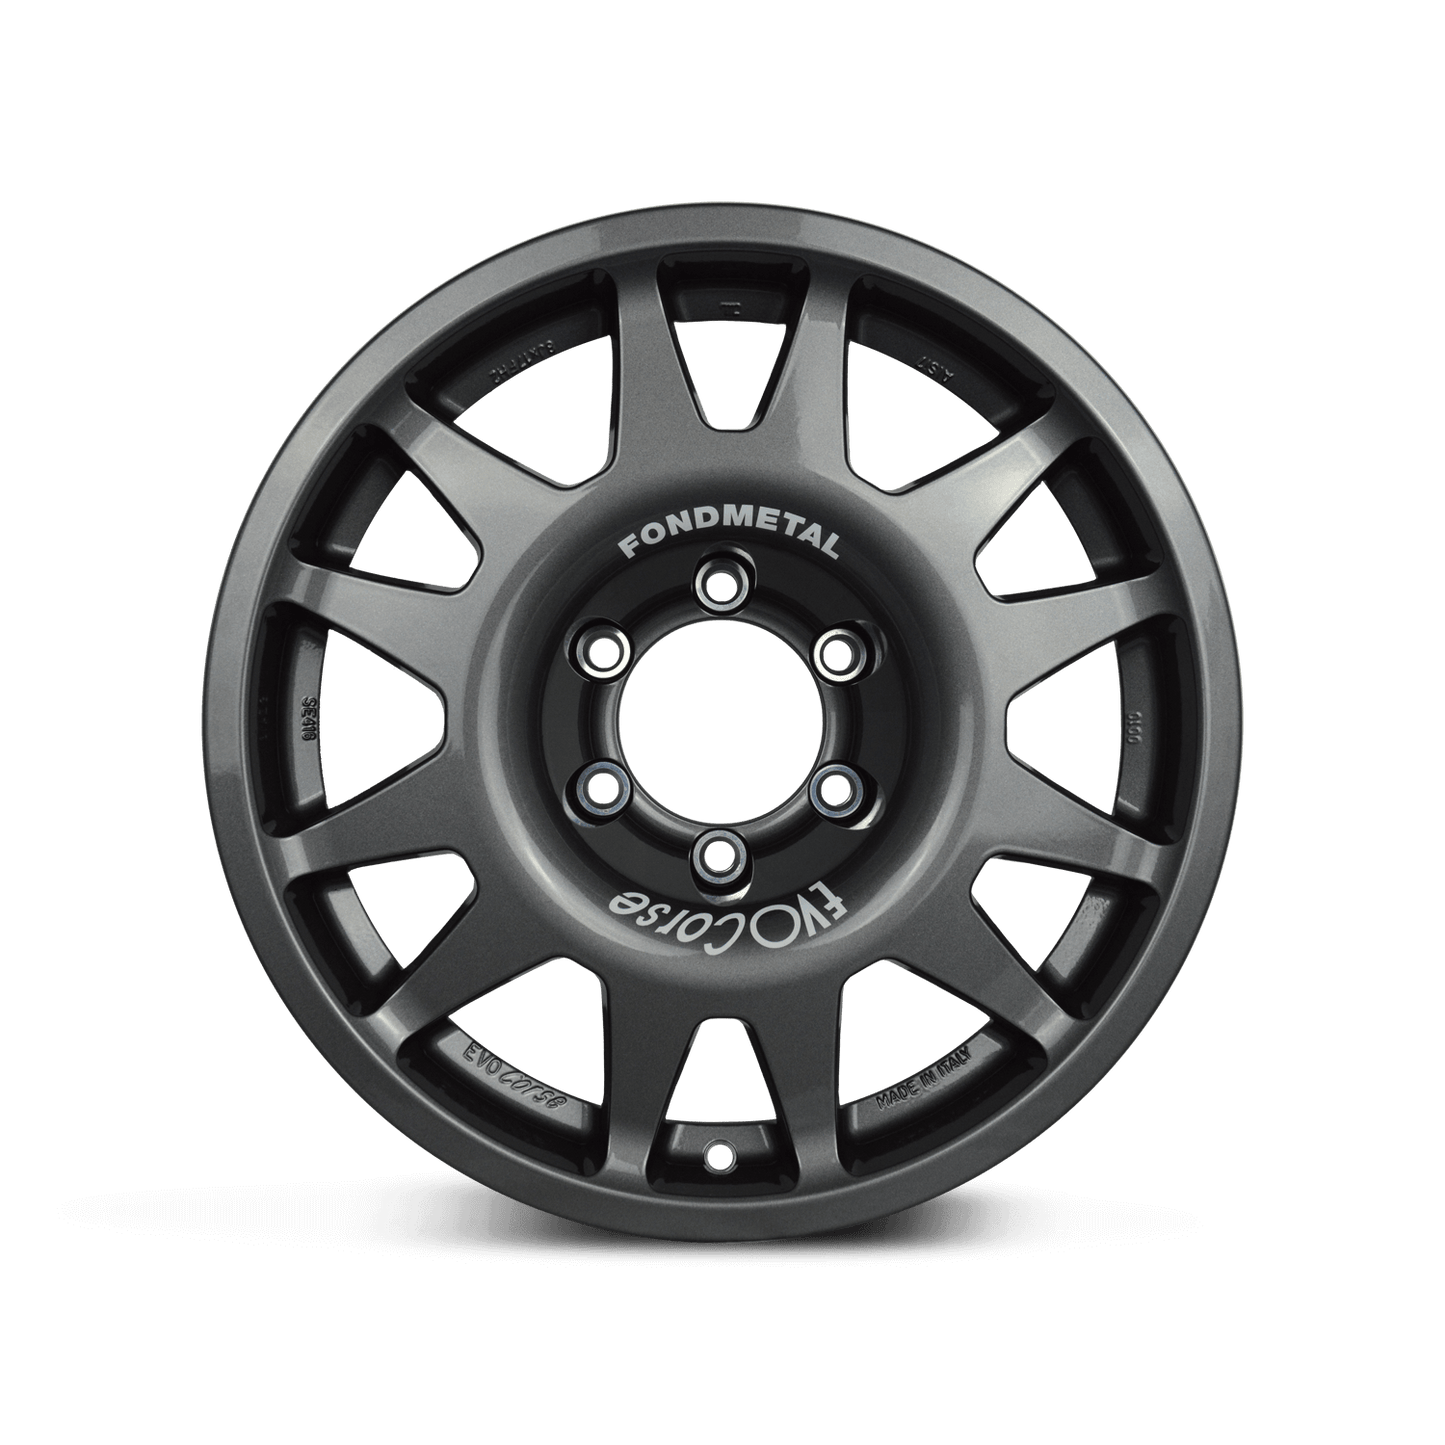 Evo Corse wheel front view in anthracite for land cruiser 200 series 8 x 17 inch ET40 strongest alloy wheel for dakar and other overlanding